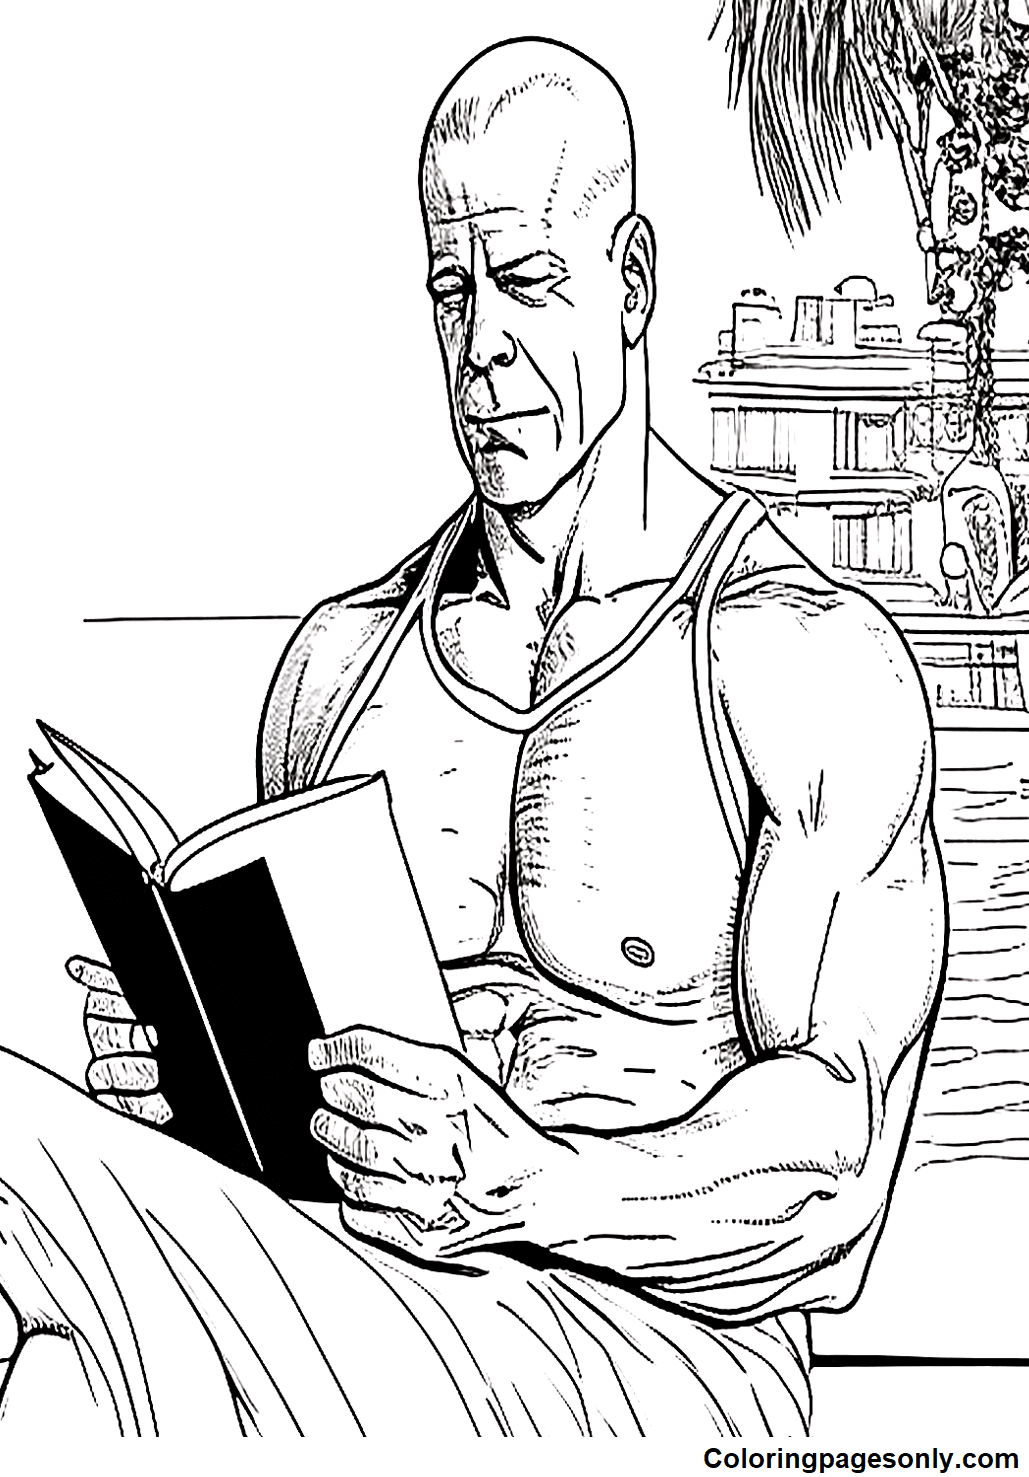 Bruce Willis Image Coloring Pages